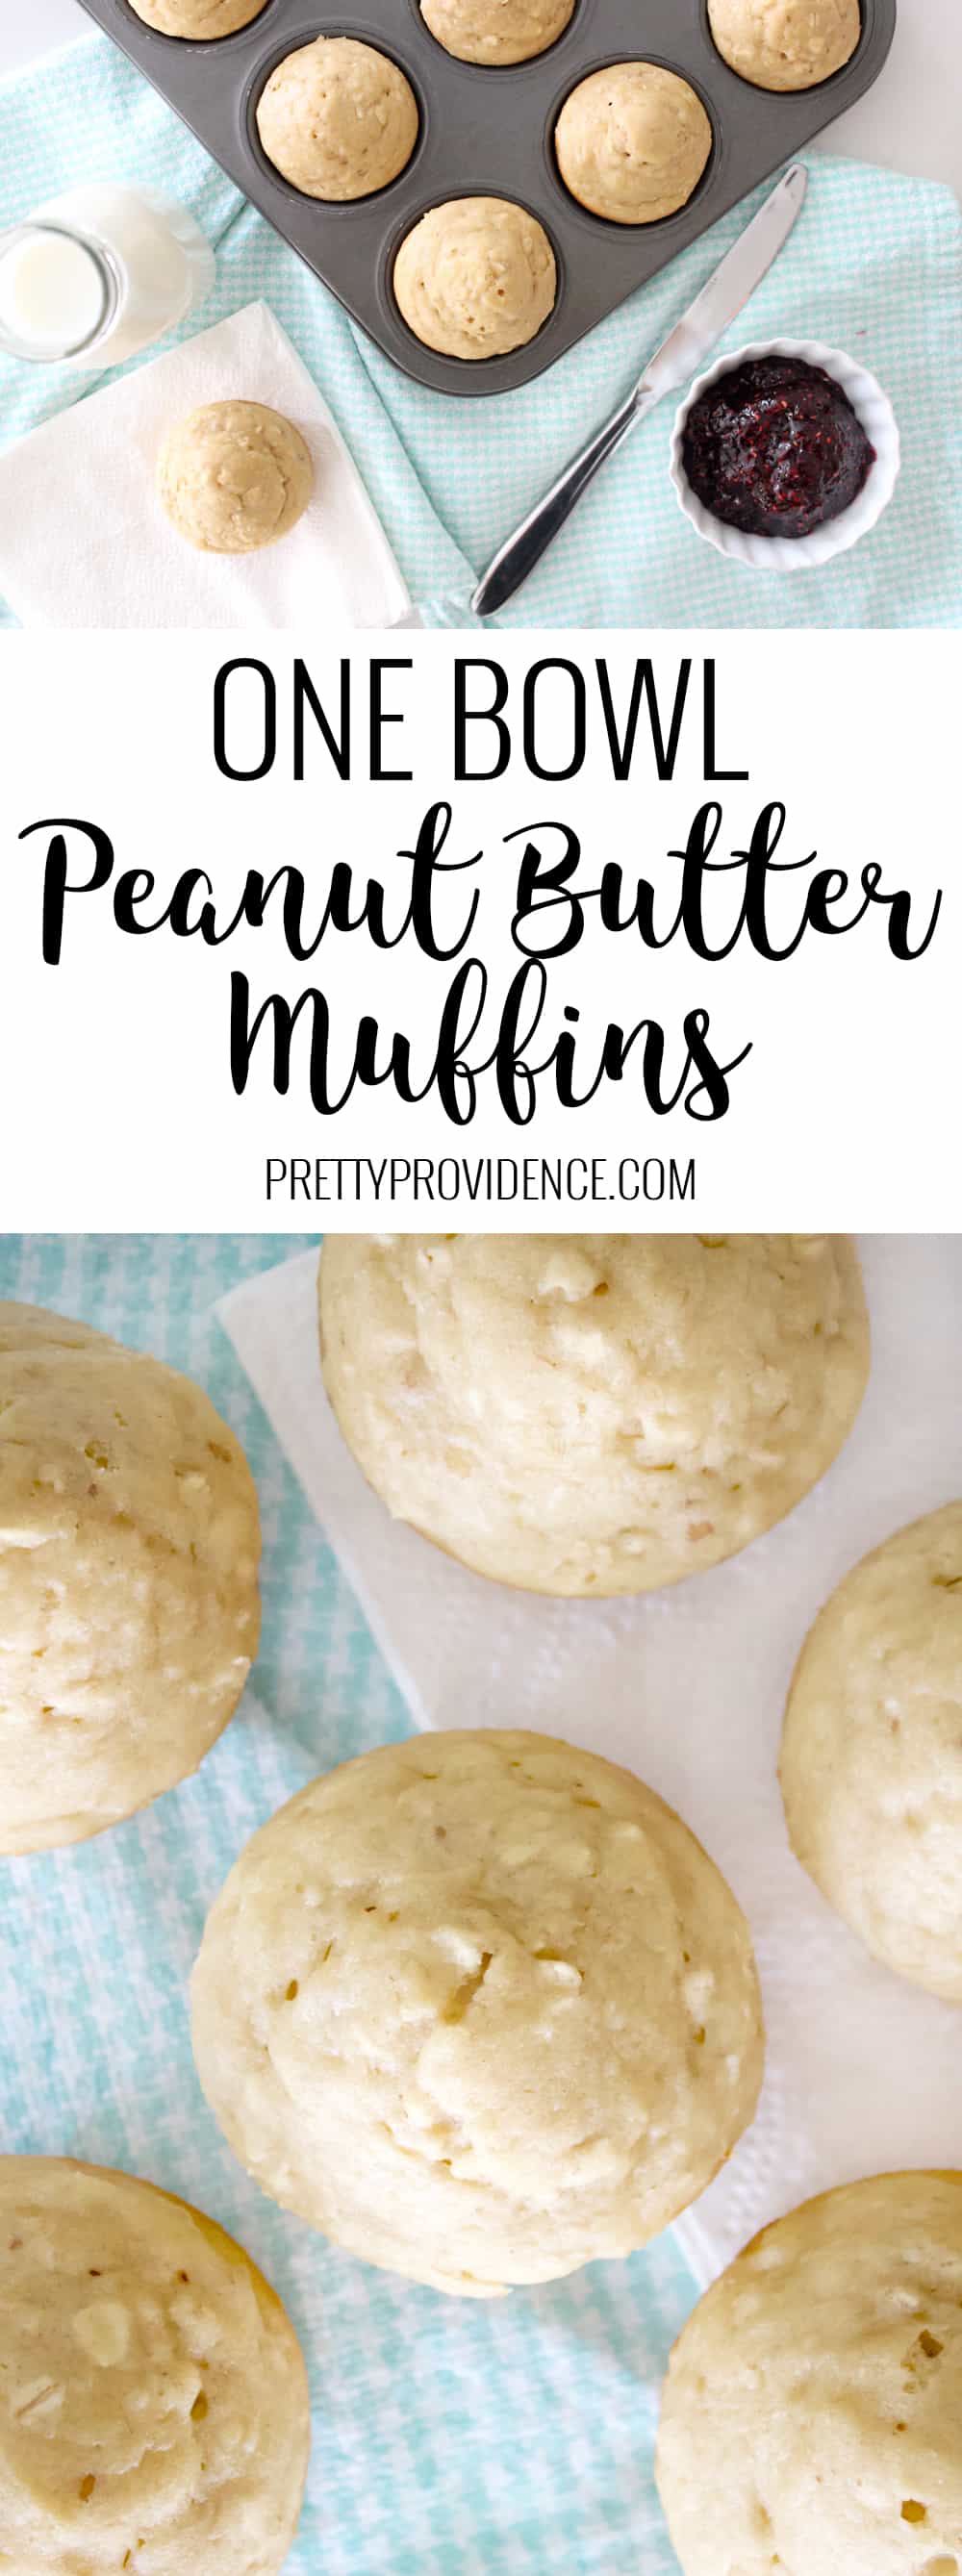 Easy and delicious peanut butter muffins! These beauties only take 15 minutes to whip up and they are sure to please any palate! 